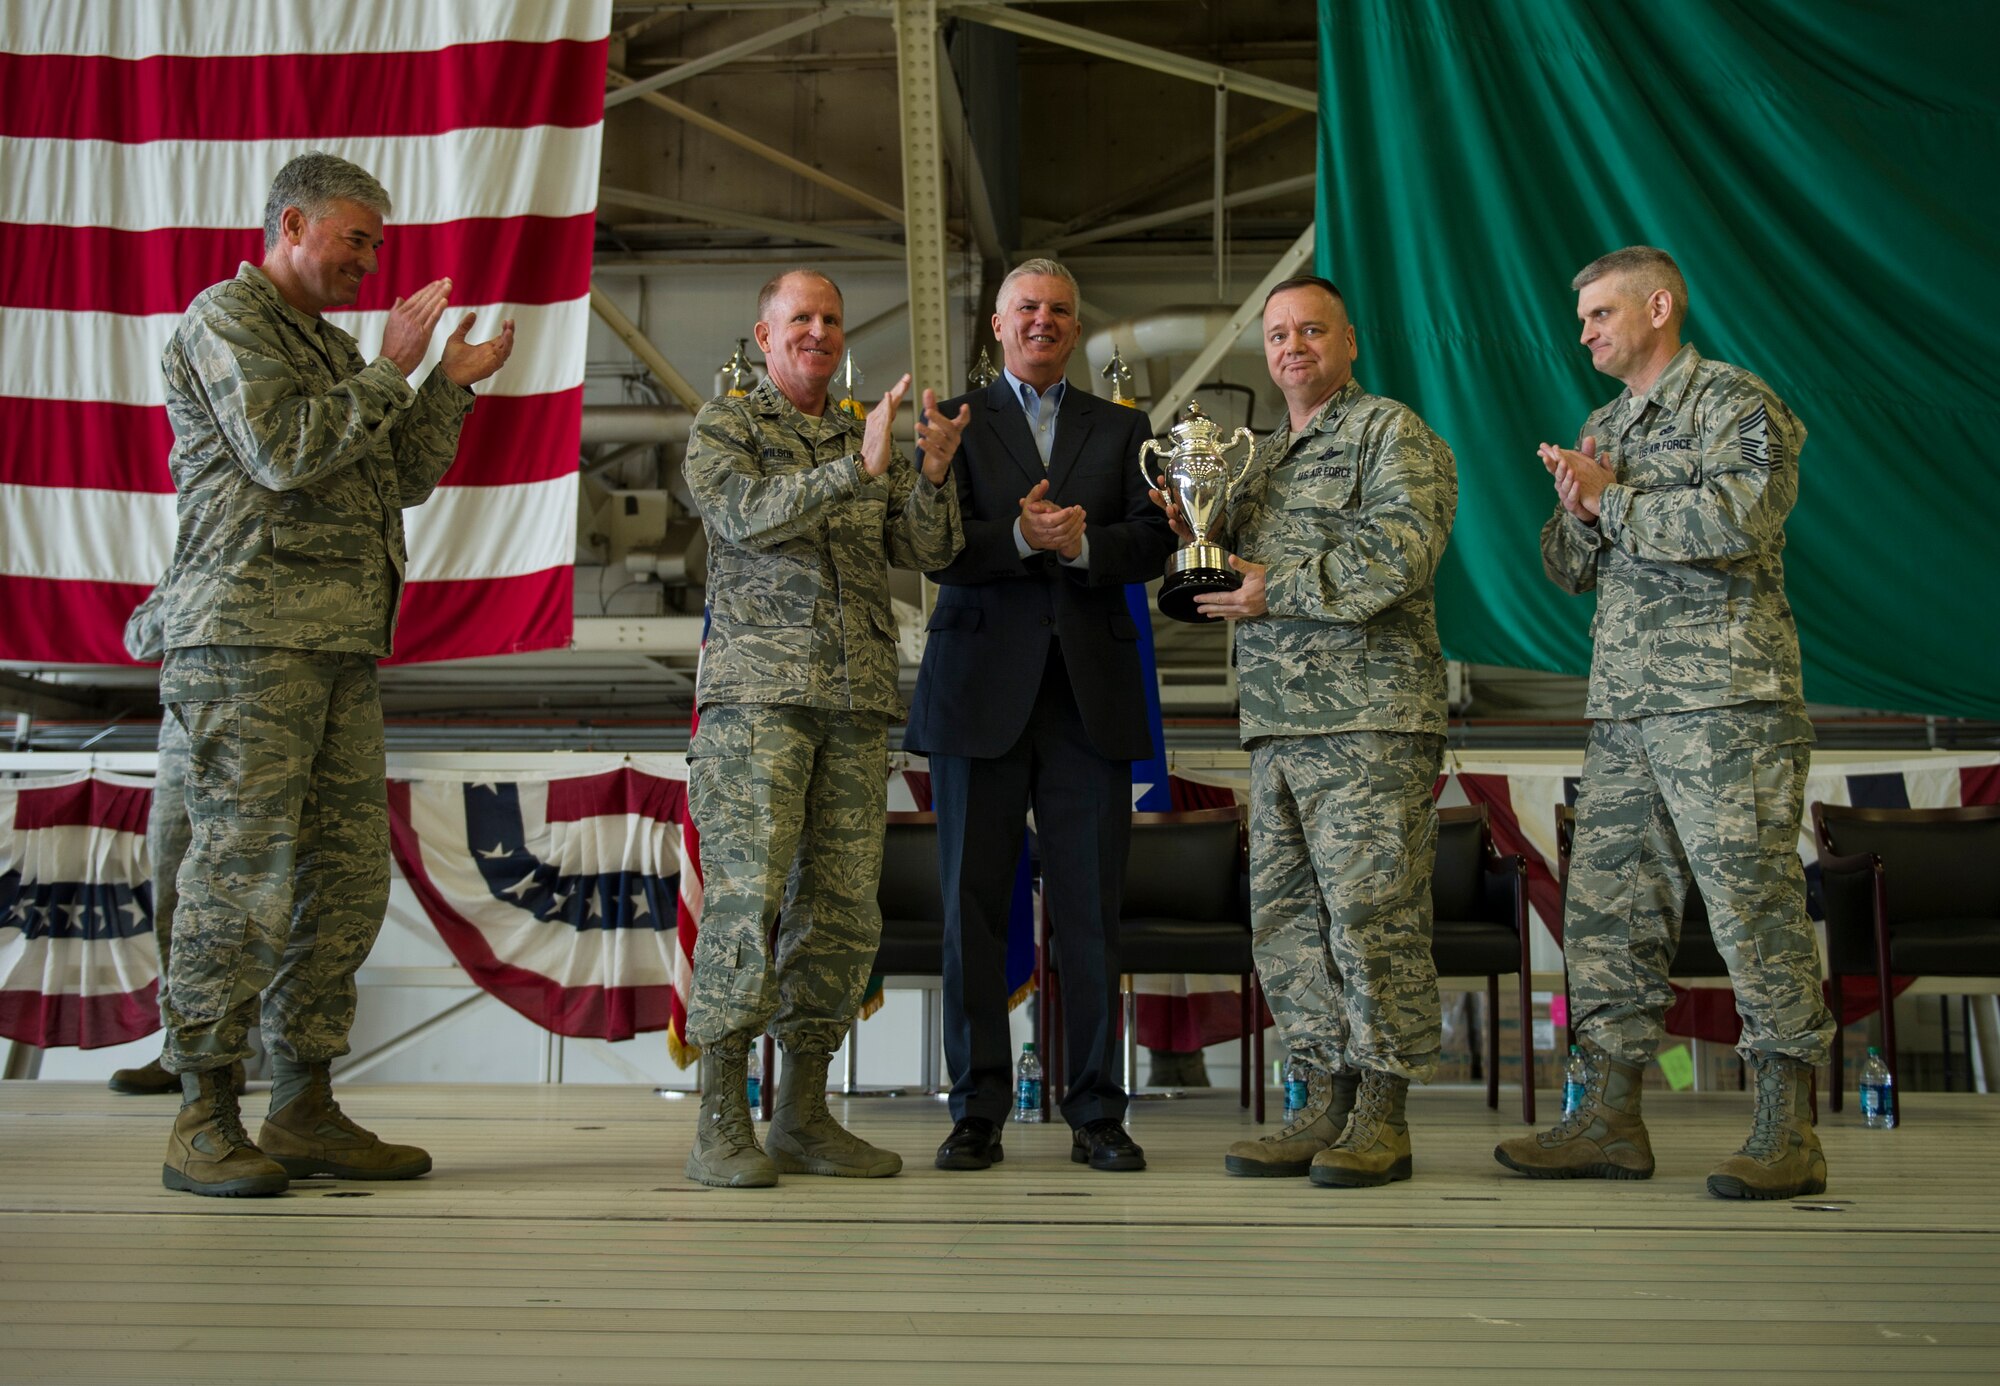 U.S. Air Force Lt. Gen. Stephen W. Wilson (second from left), U.S. Strategic Command (USSTRATCOM) deputy commander, and Mr. W. Gary Gates (center), Strategic Command Consultation (SCC) Committee member, present the 2015 Omaha Trophy, strategic aircraft category, to U.S. Air Force Col. Brian McDaniel (second from right), 92nd Air Refueling Wing commander, and other base leaders during an award ceremony at Fairchild Air Force Base, Wash., March 14, 2016. Also pictured on stage are U.S. Air Force Lt. Gen. Sam Cox (left), 18th Air Force and USSTRATCOM’s Task Force 294 commander, and U.S. Air Force Chief Master Sgt. Christian M. Pugh (right), 92nd Air Refueling Wing command chief master sergeant. Wilson and Gates presented the trophy, on behalf of USSTRATCOM and the SCC, to recognize the 92nd Air Refueling Wing’s contributions to USSTRATCOM’s global strategic missions. The Omaha Trophy, which dates back to the U.S. Air Force’s Strategic Air Command, was originally created by the SCC in 1971. At the time, a single trophy was presented annually as a token of appreciation to USSTRATCOM’s best wing. Since then, the tradition has evolved to unit-level awards that recognize the command’s premier intercontinental ballistic missile (ICBM) wing, ballistic missile submarine, strategic bomber wing and global operations (space/cyberspace) unit. This year, a new category was added to include the combatant command’s top strategic aircraft wing. (U.S. Air Force photo by Airman 1st Class Sean Campbell)